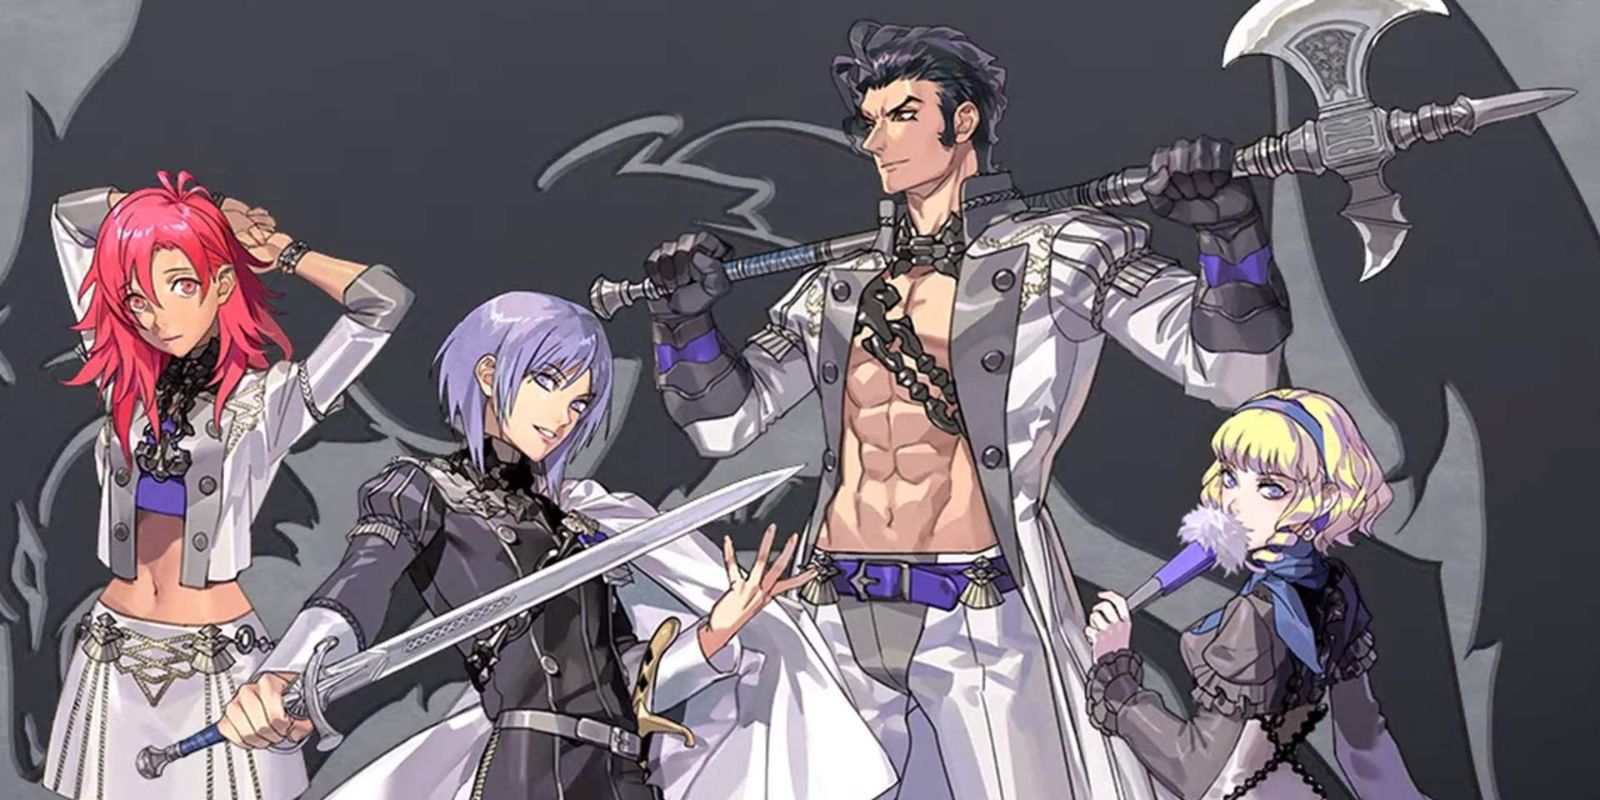 Fire Emblem: Here's What Three Houses' DLC Gets You (And If It's